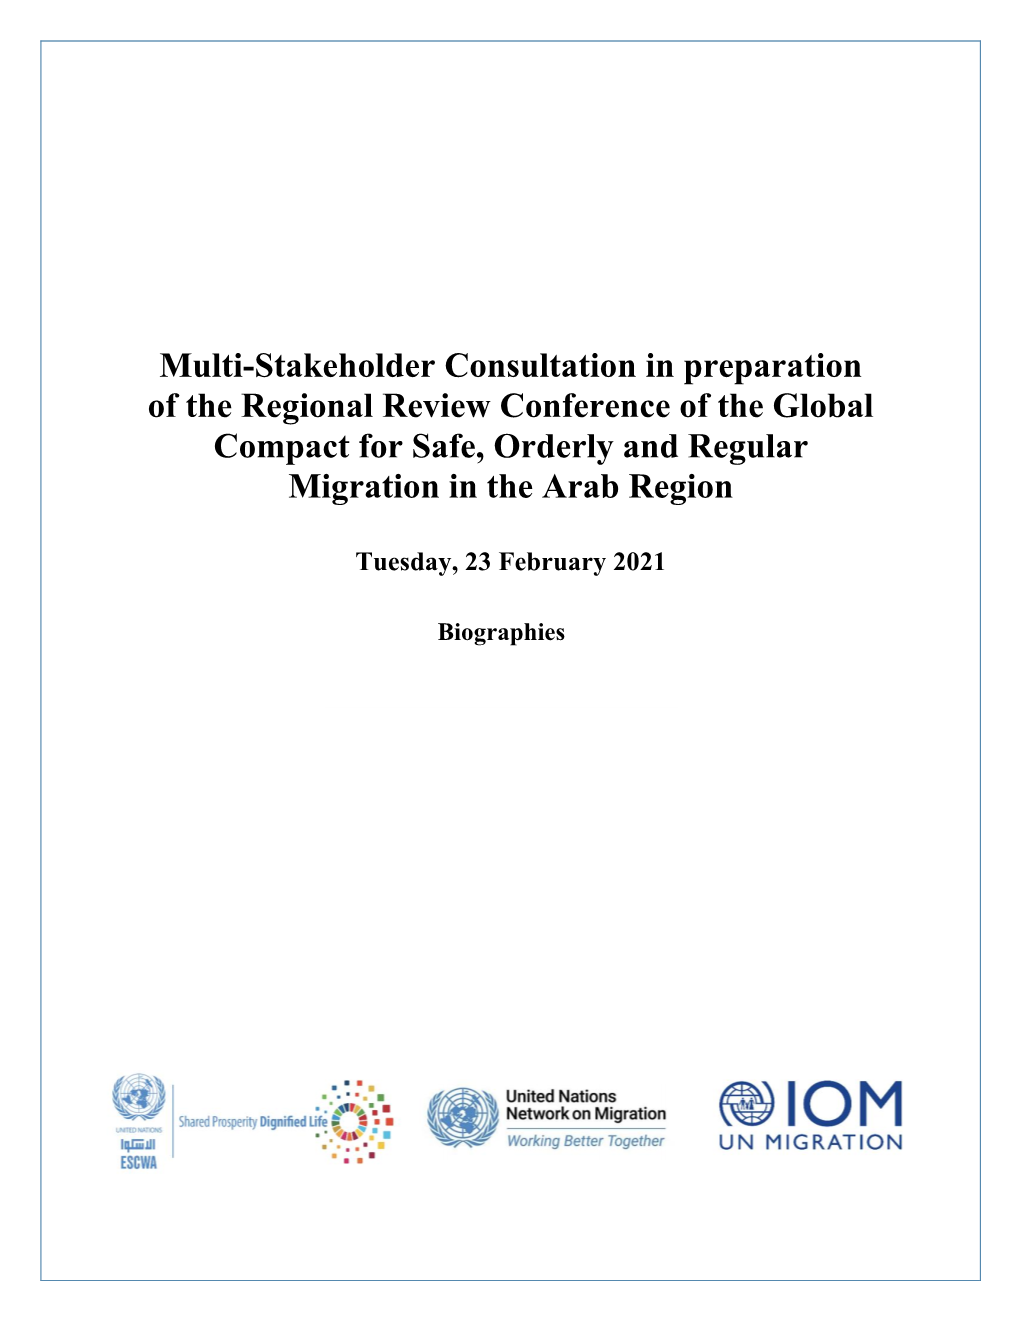 Multi-Stakeholder Consultation in Preparation of the Regional Review Conference of the Global Compact for Safe, Orderly and Regular Migration in the Arab Region